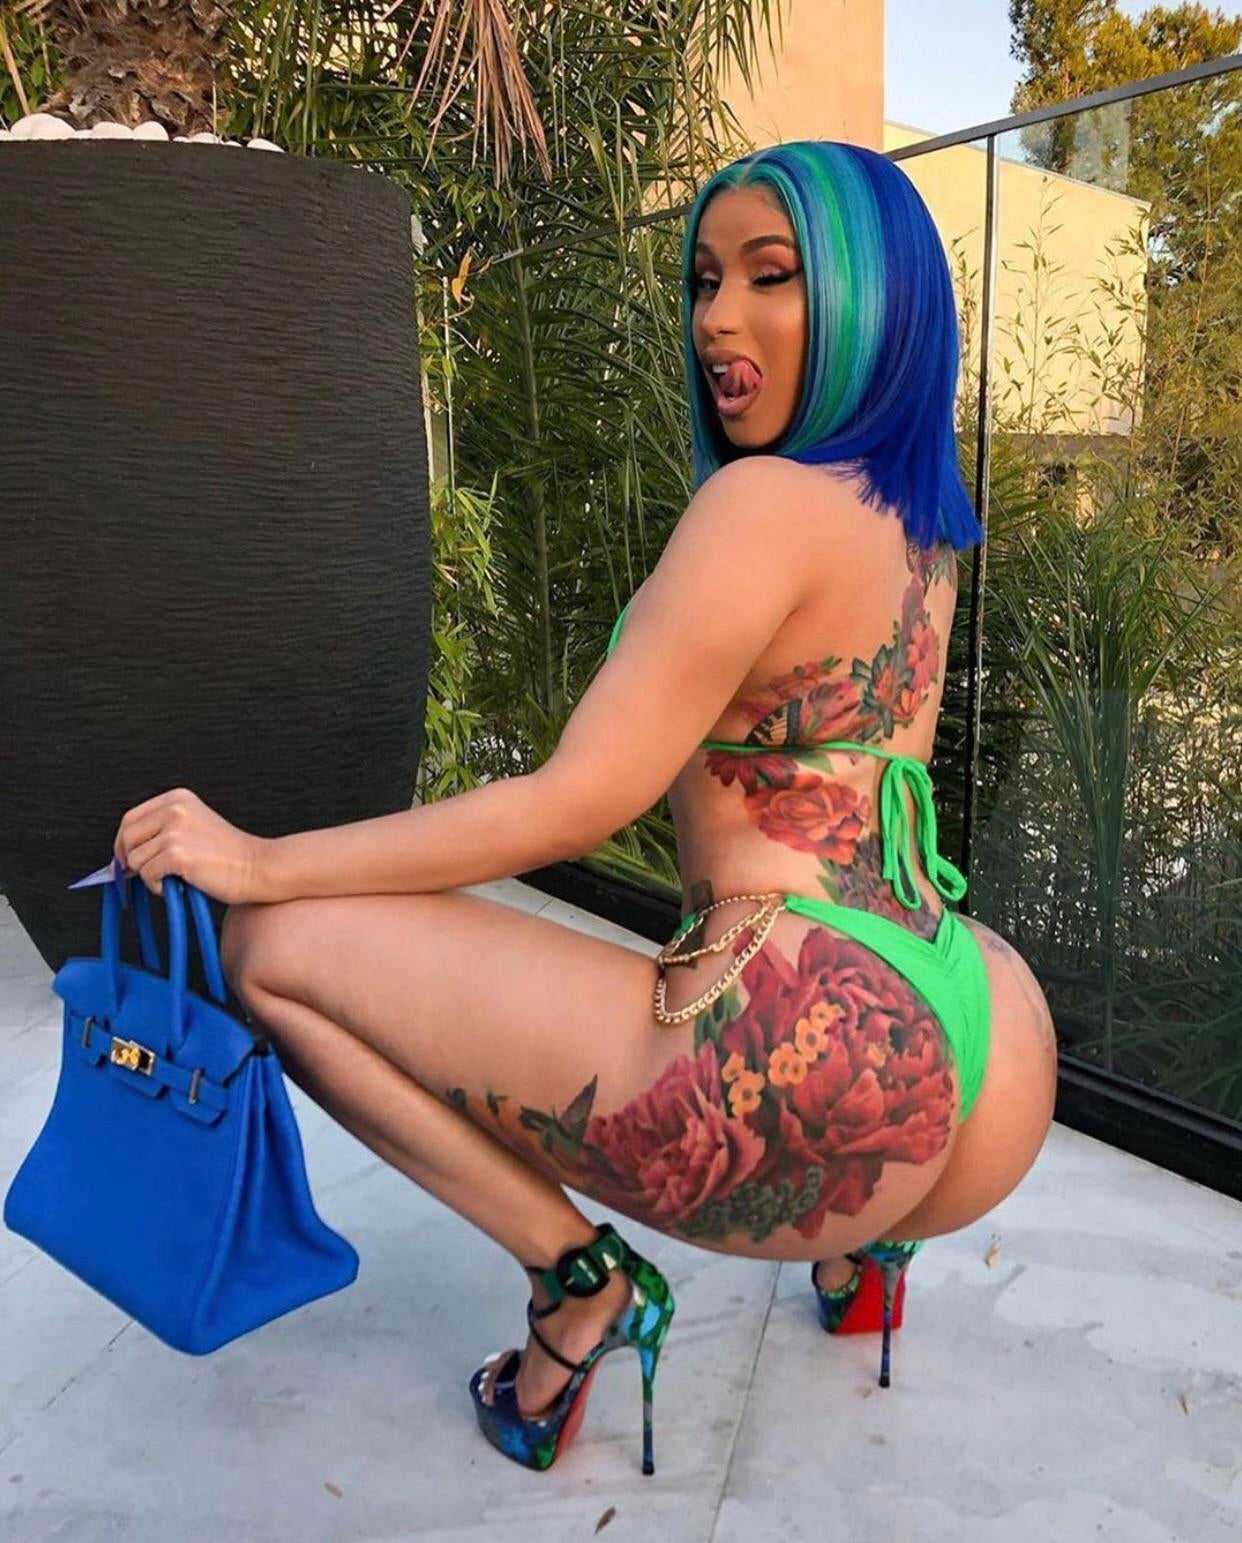 Cardi B Can Ride My Face While I Get Fucke